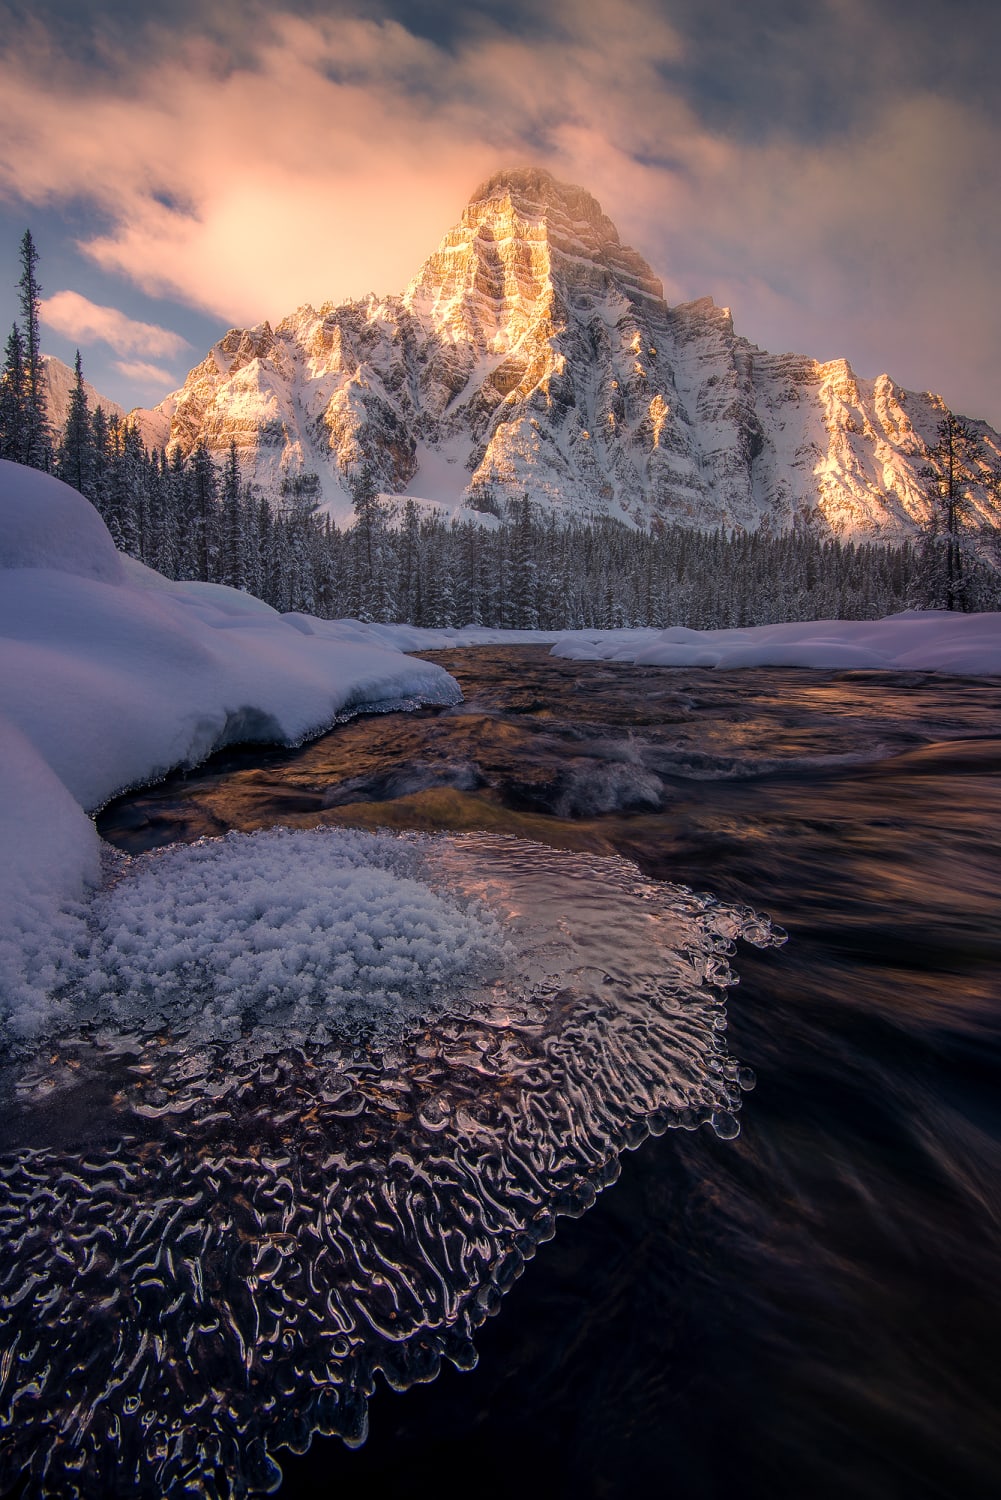 My toesies got a little chilled taking this shot of Mt Cephron during sunrise in Banff, Canada @ross_schram